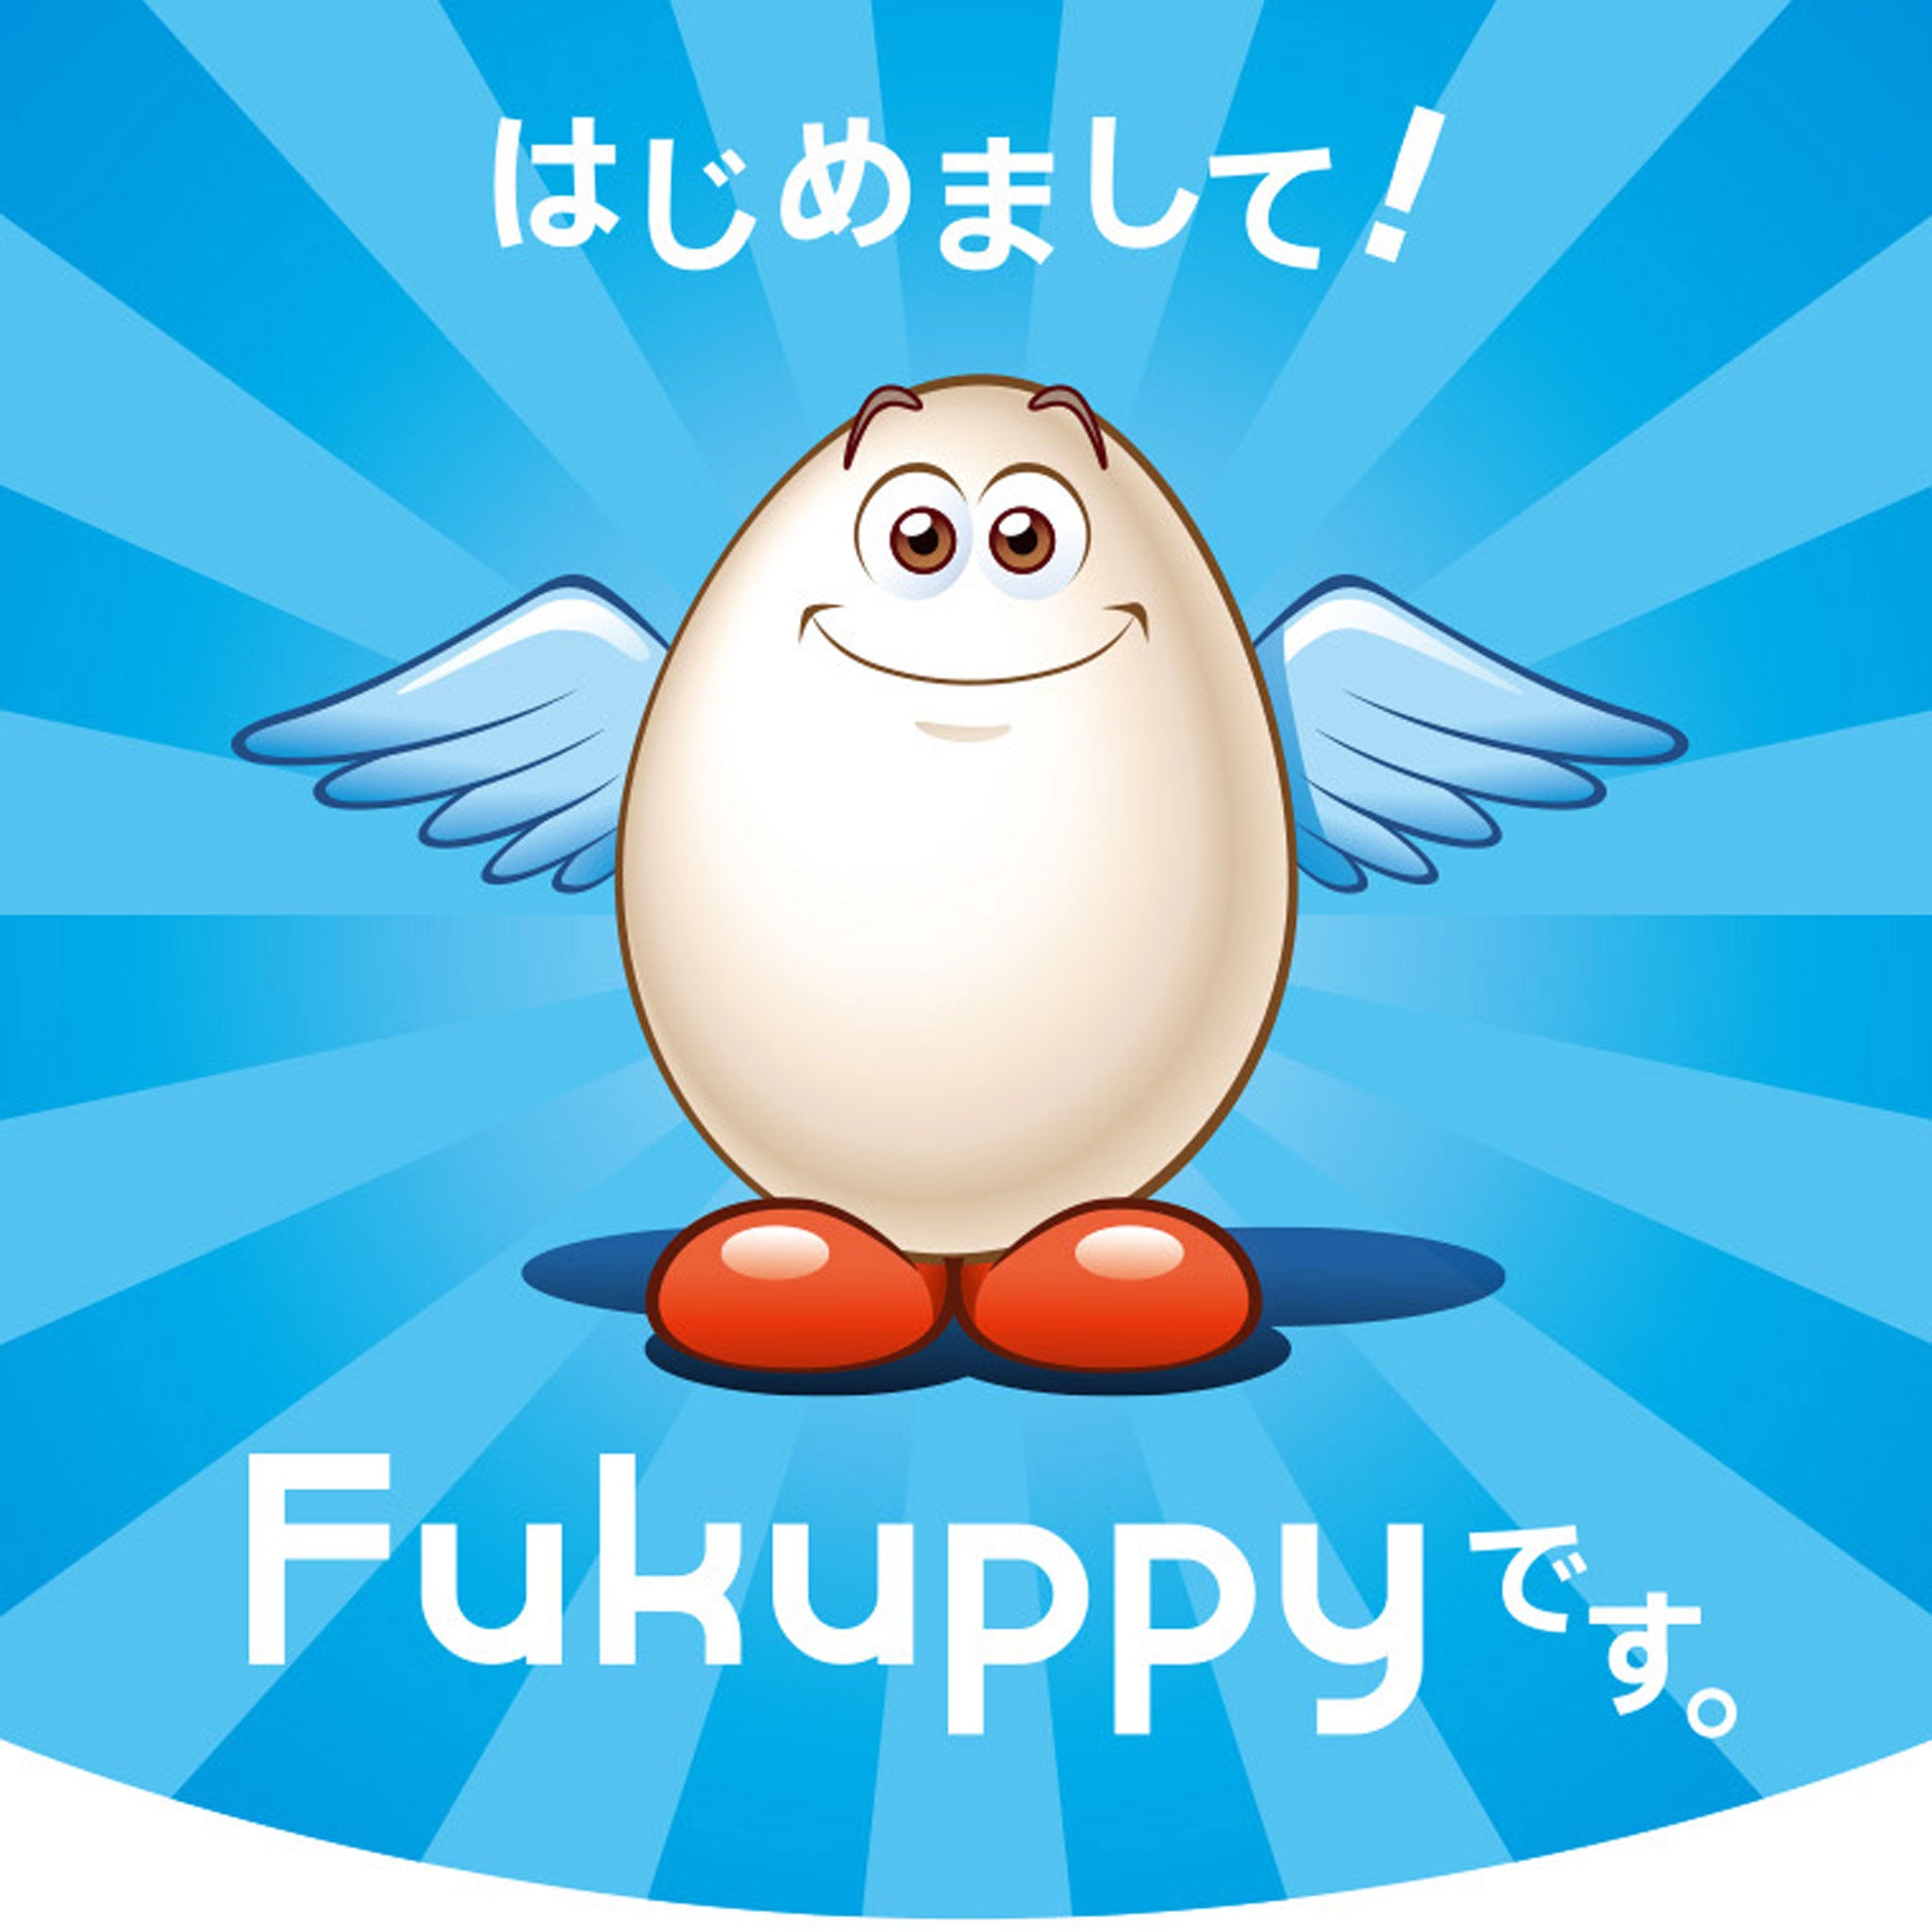 Fukuppy is the mascot of Fukushima Industries In the release he says: "my friends say I’m a bit of a klutz. But I’m always working hard to make myself shine!”